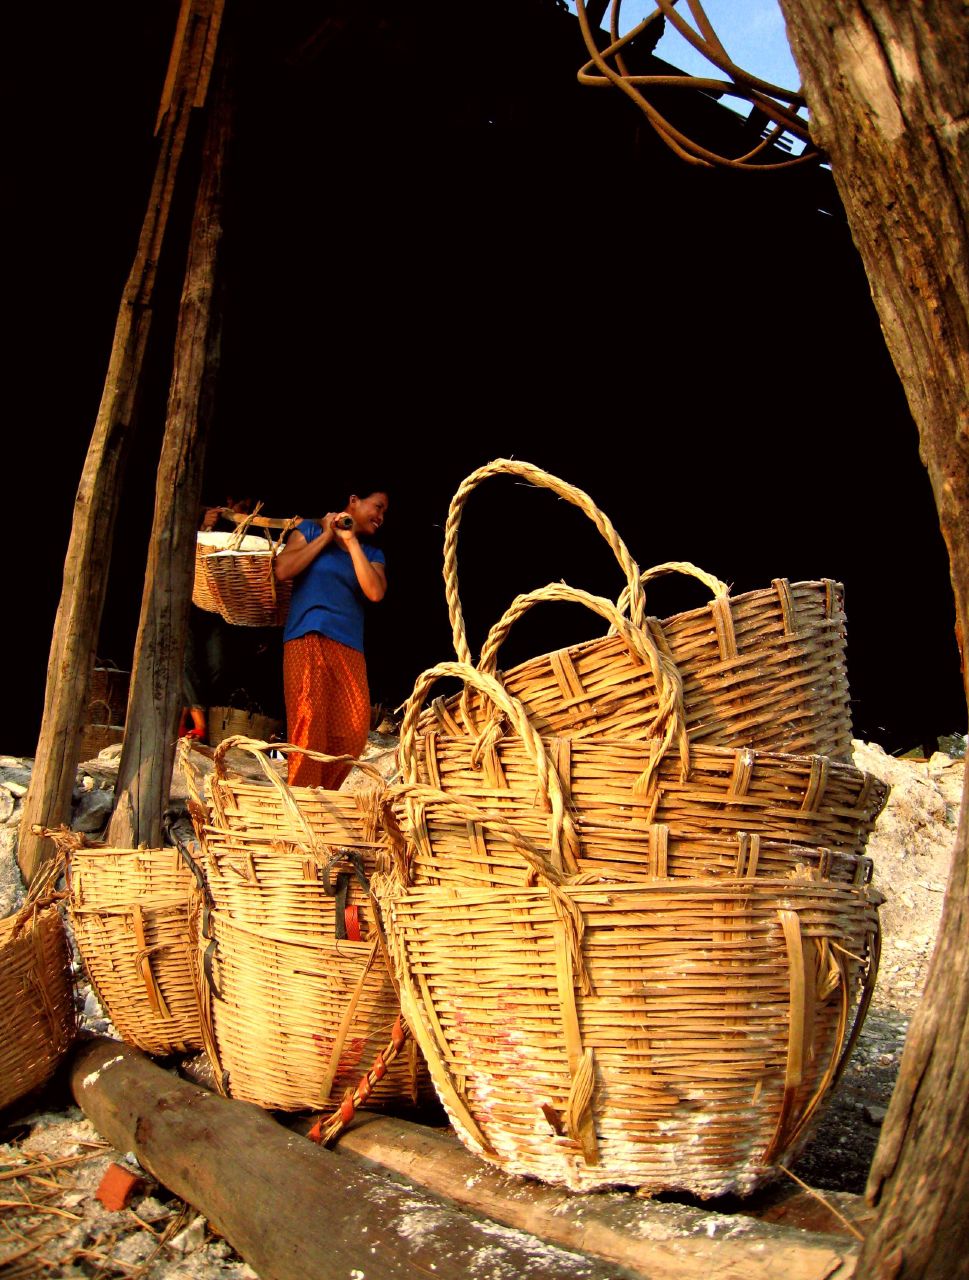 baskets piled on top of each other near a woman